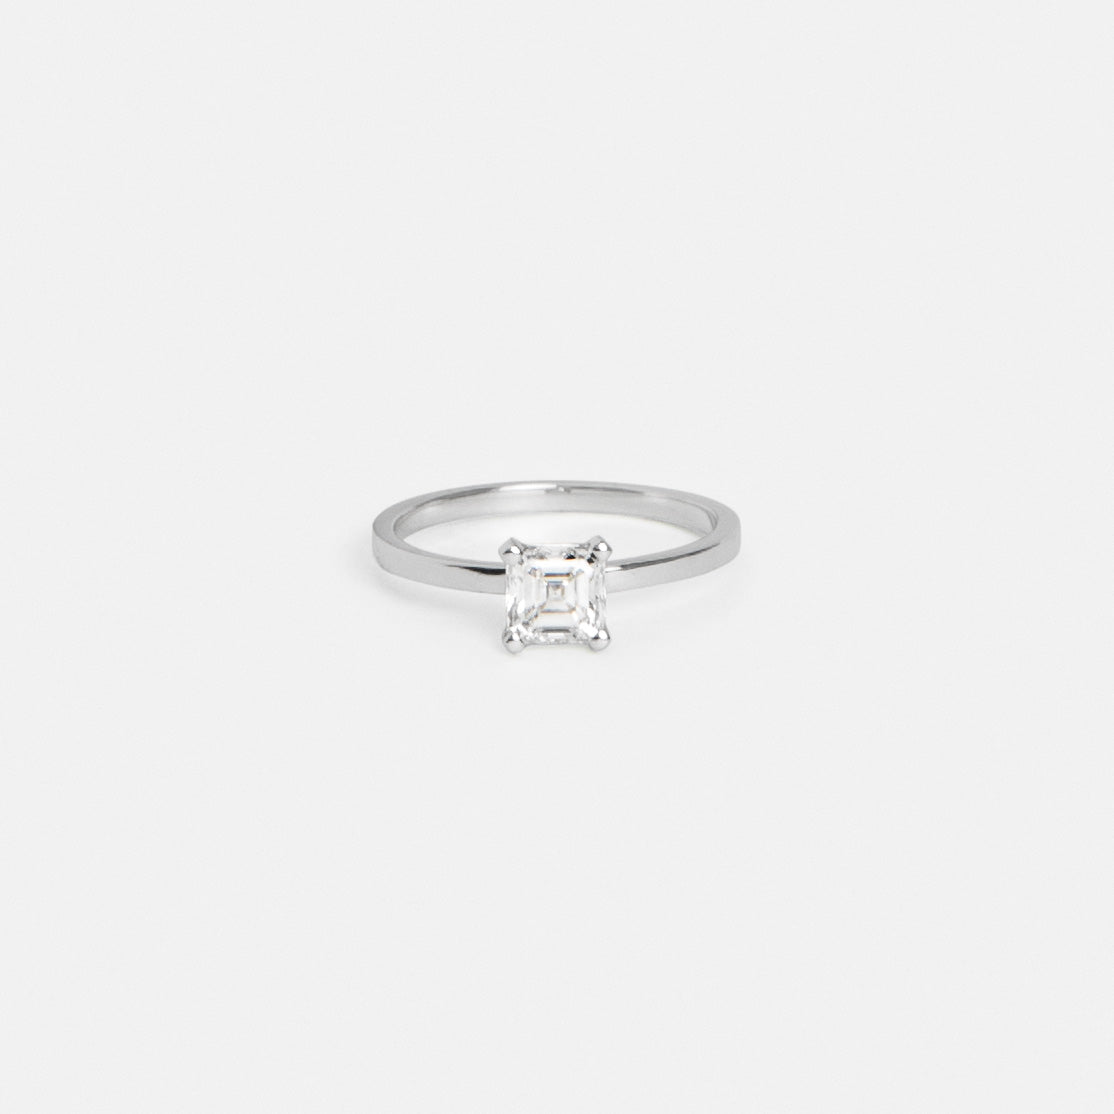 Ryta Unique Engagement Ring Platinum Set With 1ct princess cut natural diamond By SHW Fine Jewelry NYC